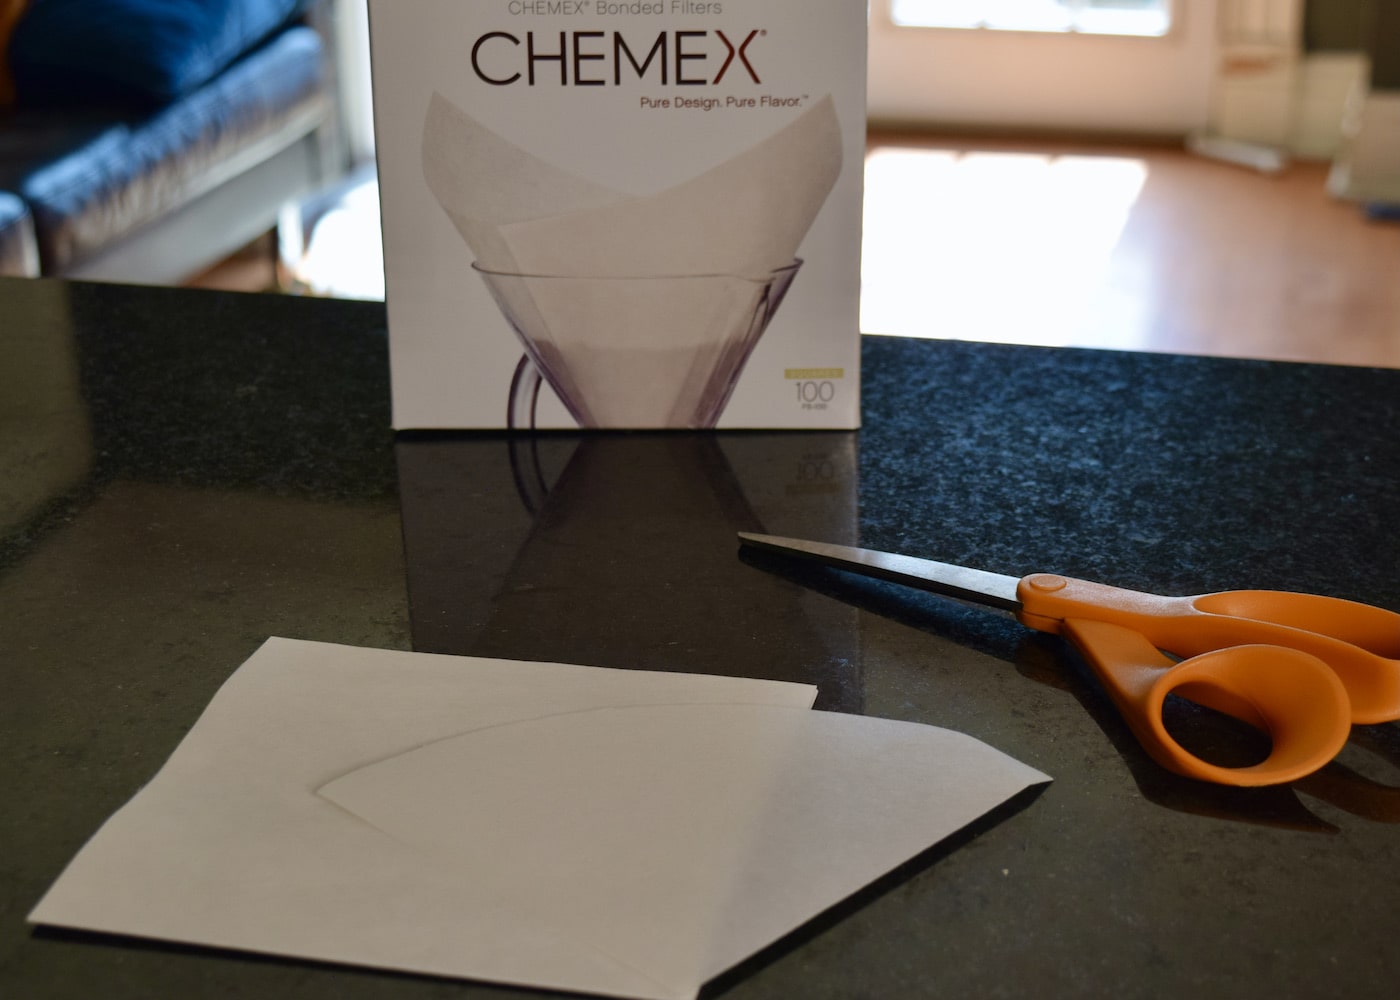 Cutting the Chemex Filter so it fits in the V60 coffee brewer